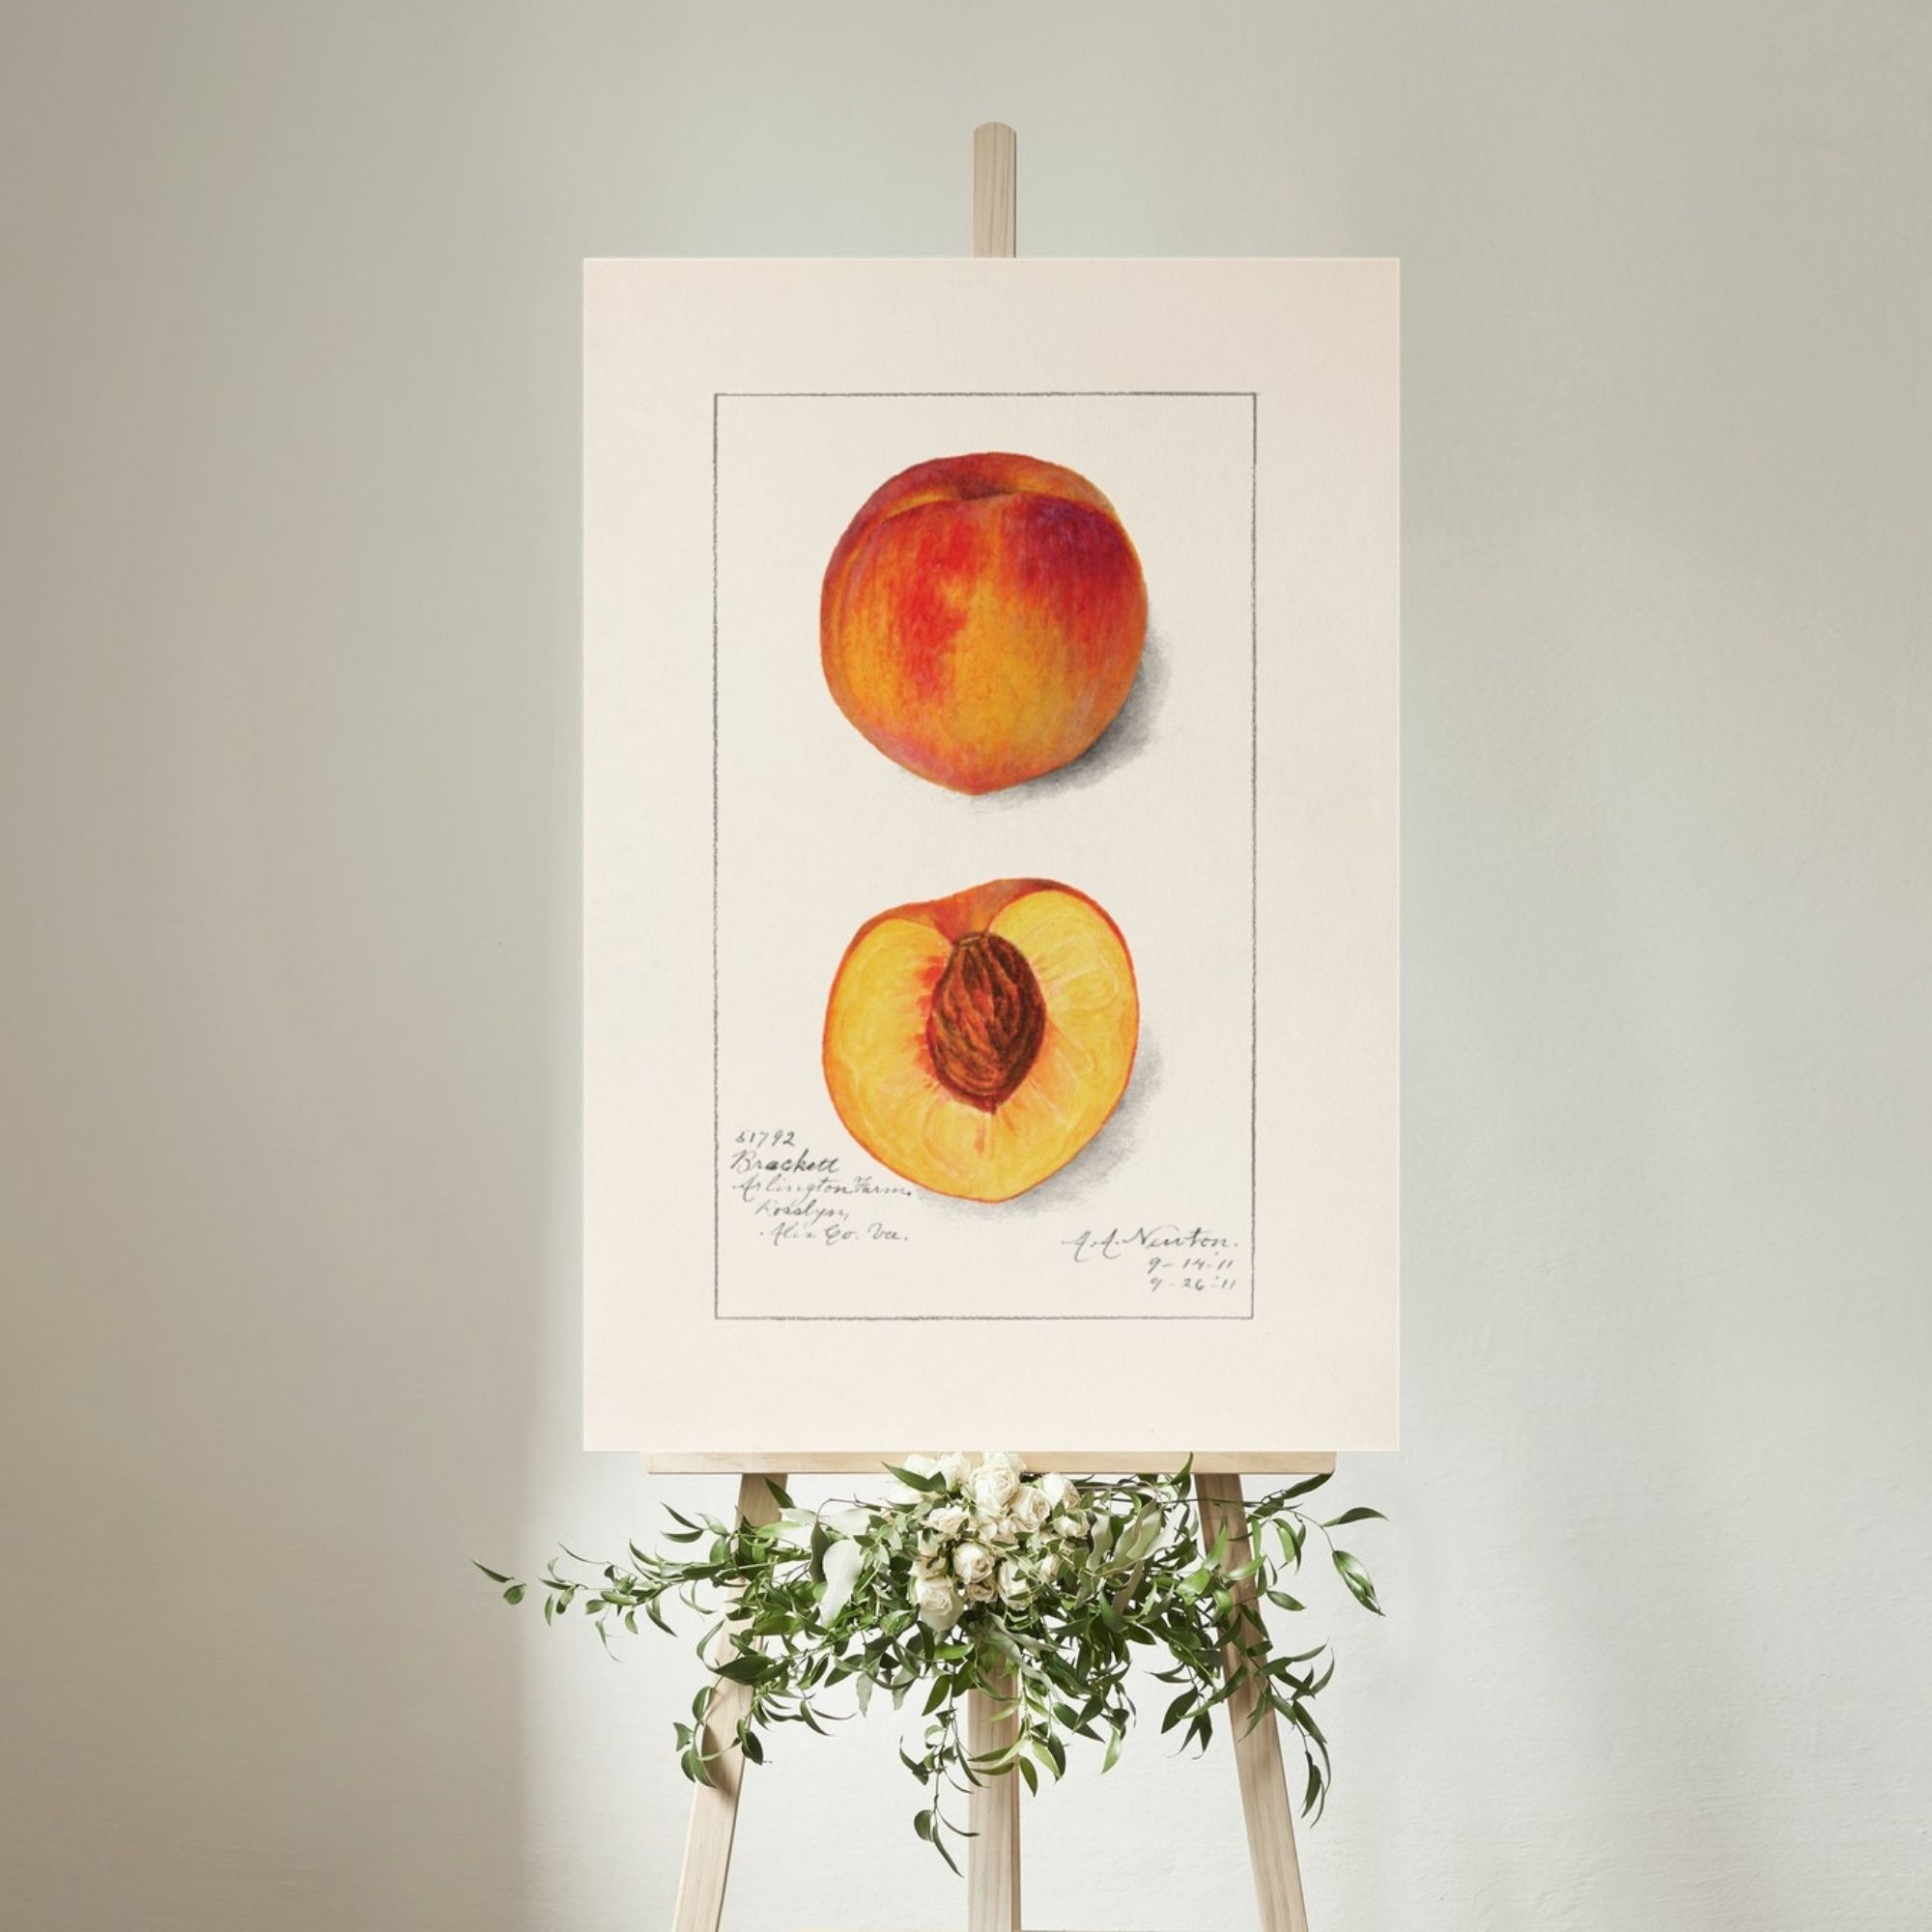 Watercolor depiction of 'Brackett' peaches from The Pomological Watercolor Collection, featuring a whole peach with a red and yellow skin and a halved peach showing a rich orange flesh with a dark pit, painted by A.H. Newton on 9-14-11 and 9-26-11, representing the fruit varieties of Fauquier Co., Virginia.